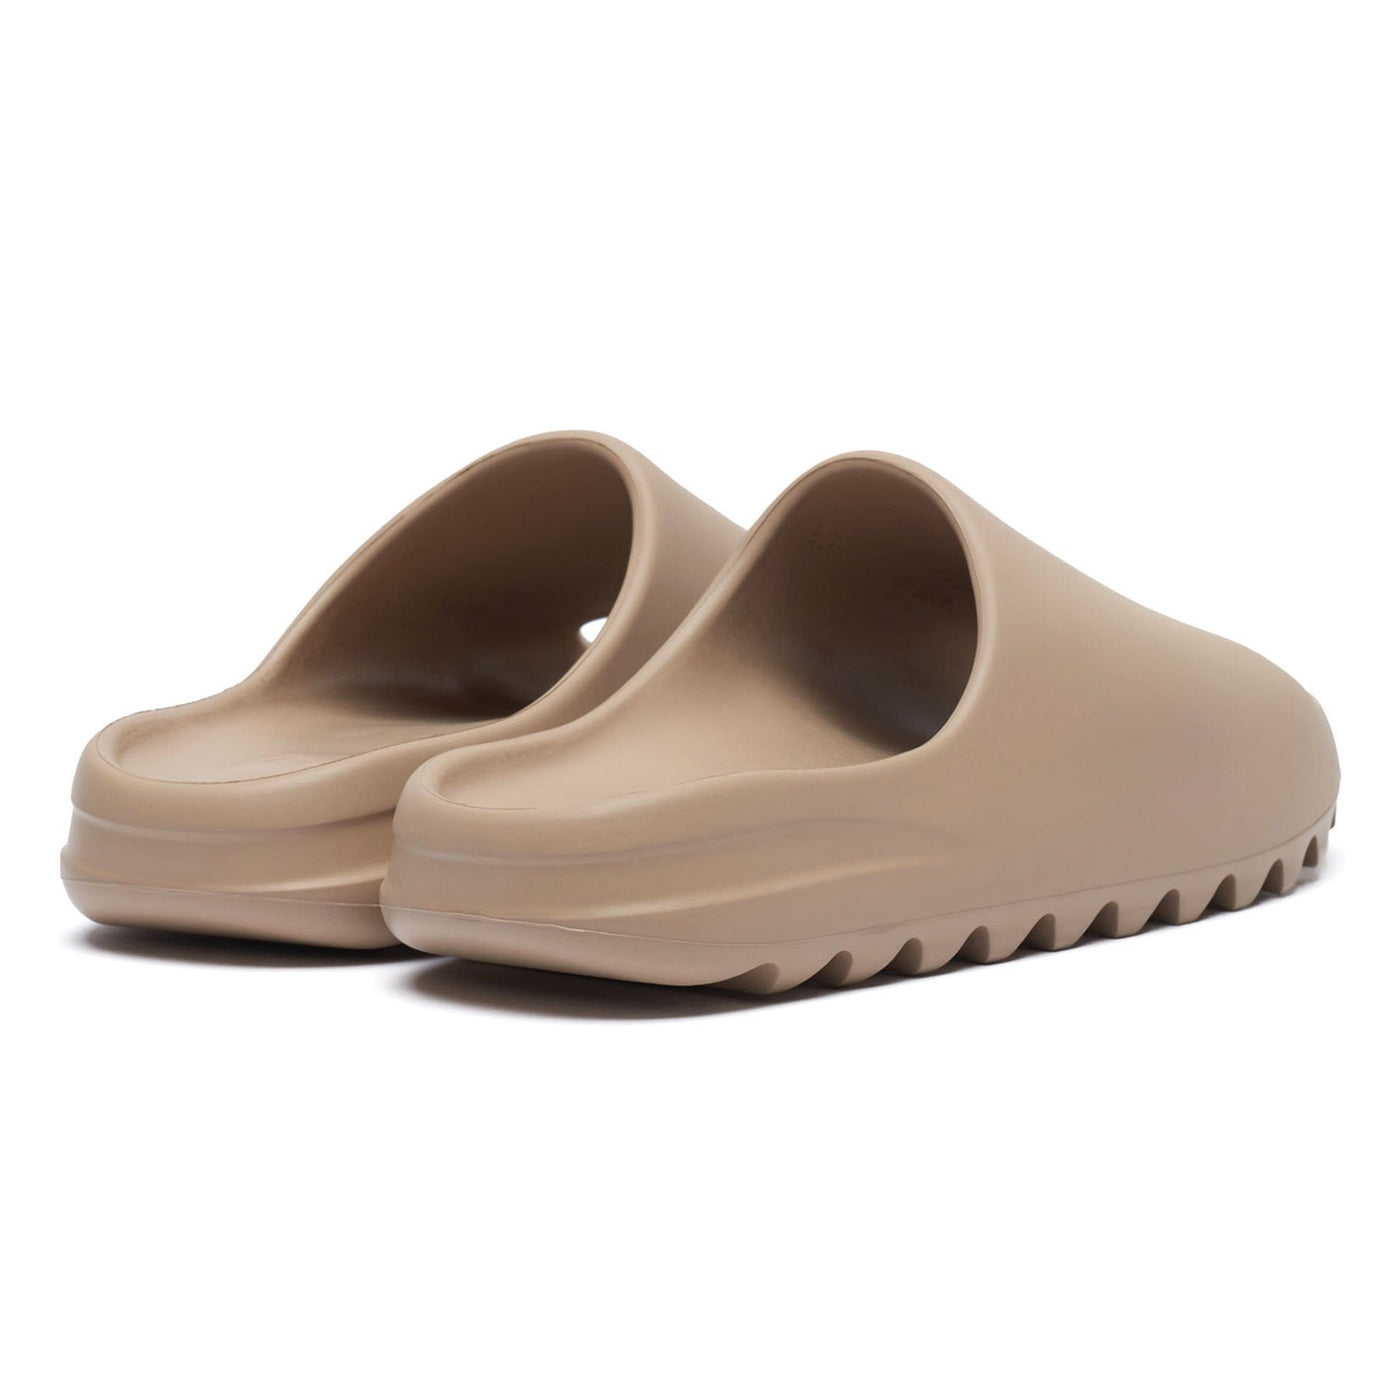 YEEZY SLIDES 'PURE' - NUDE